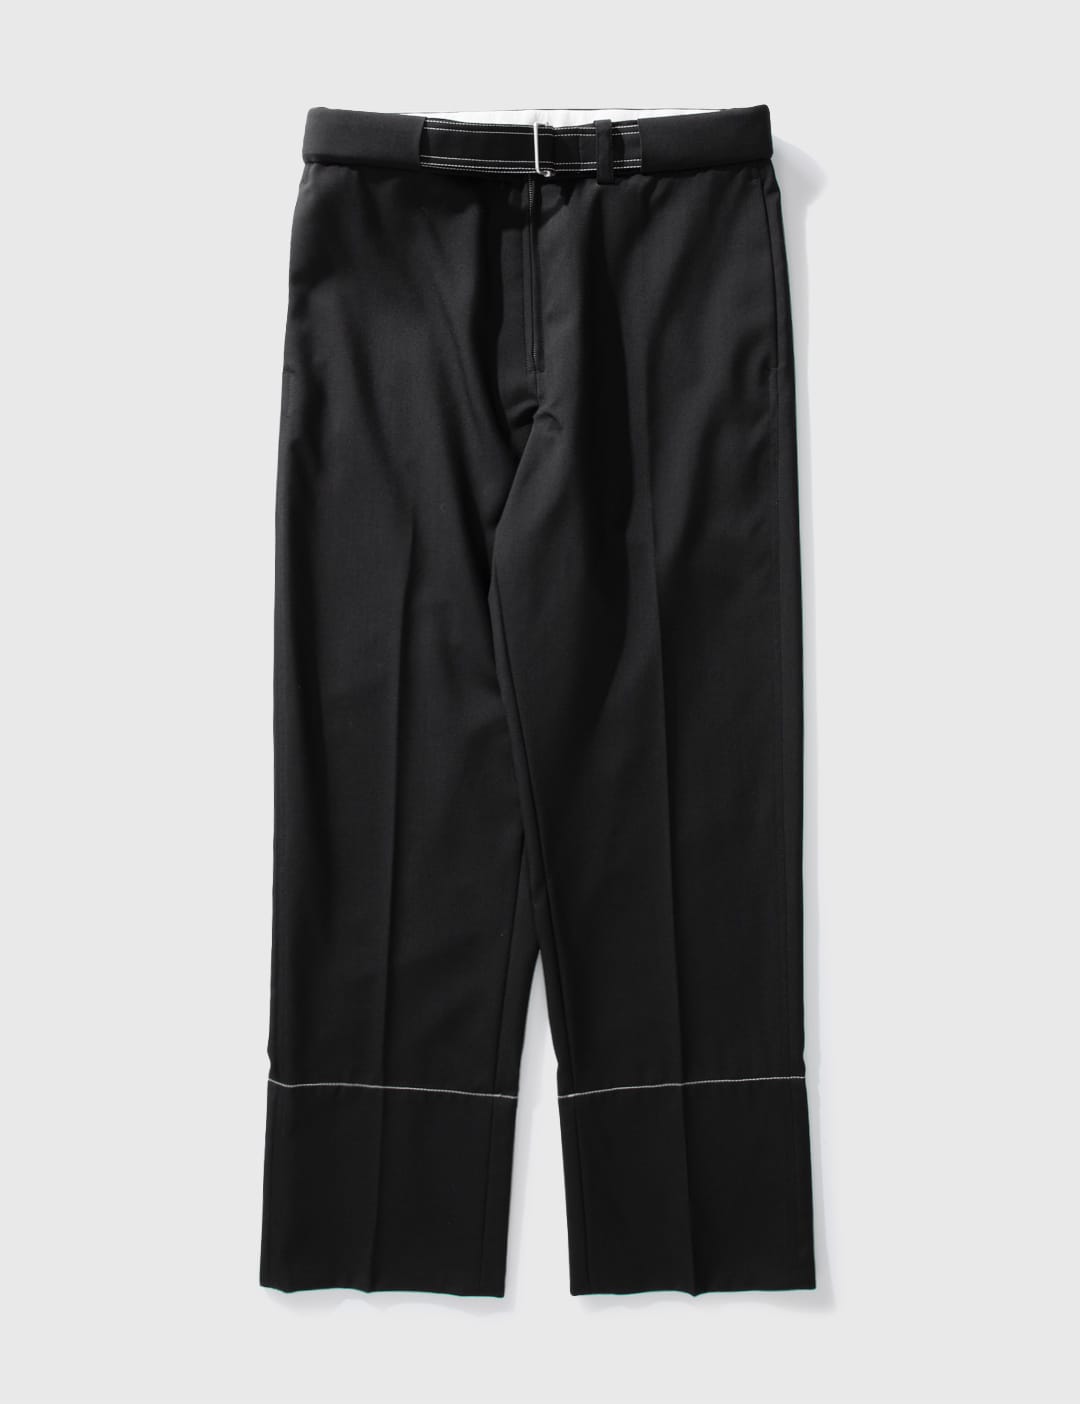 OAMC - Argon Trousers | HBX - Globally Curated Fashion and 